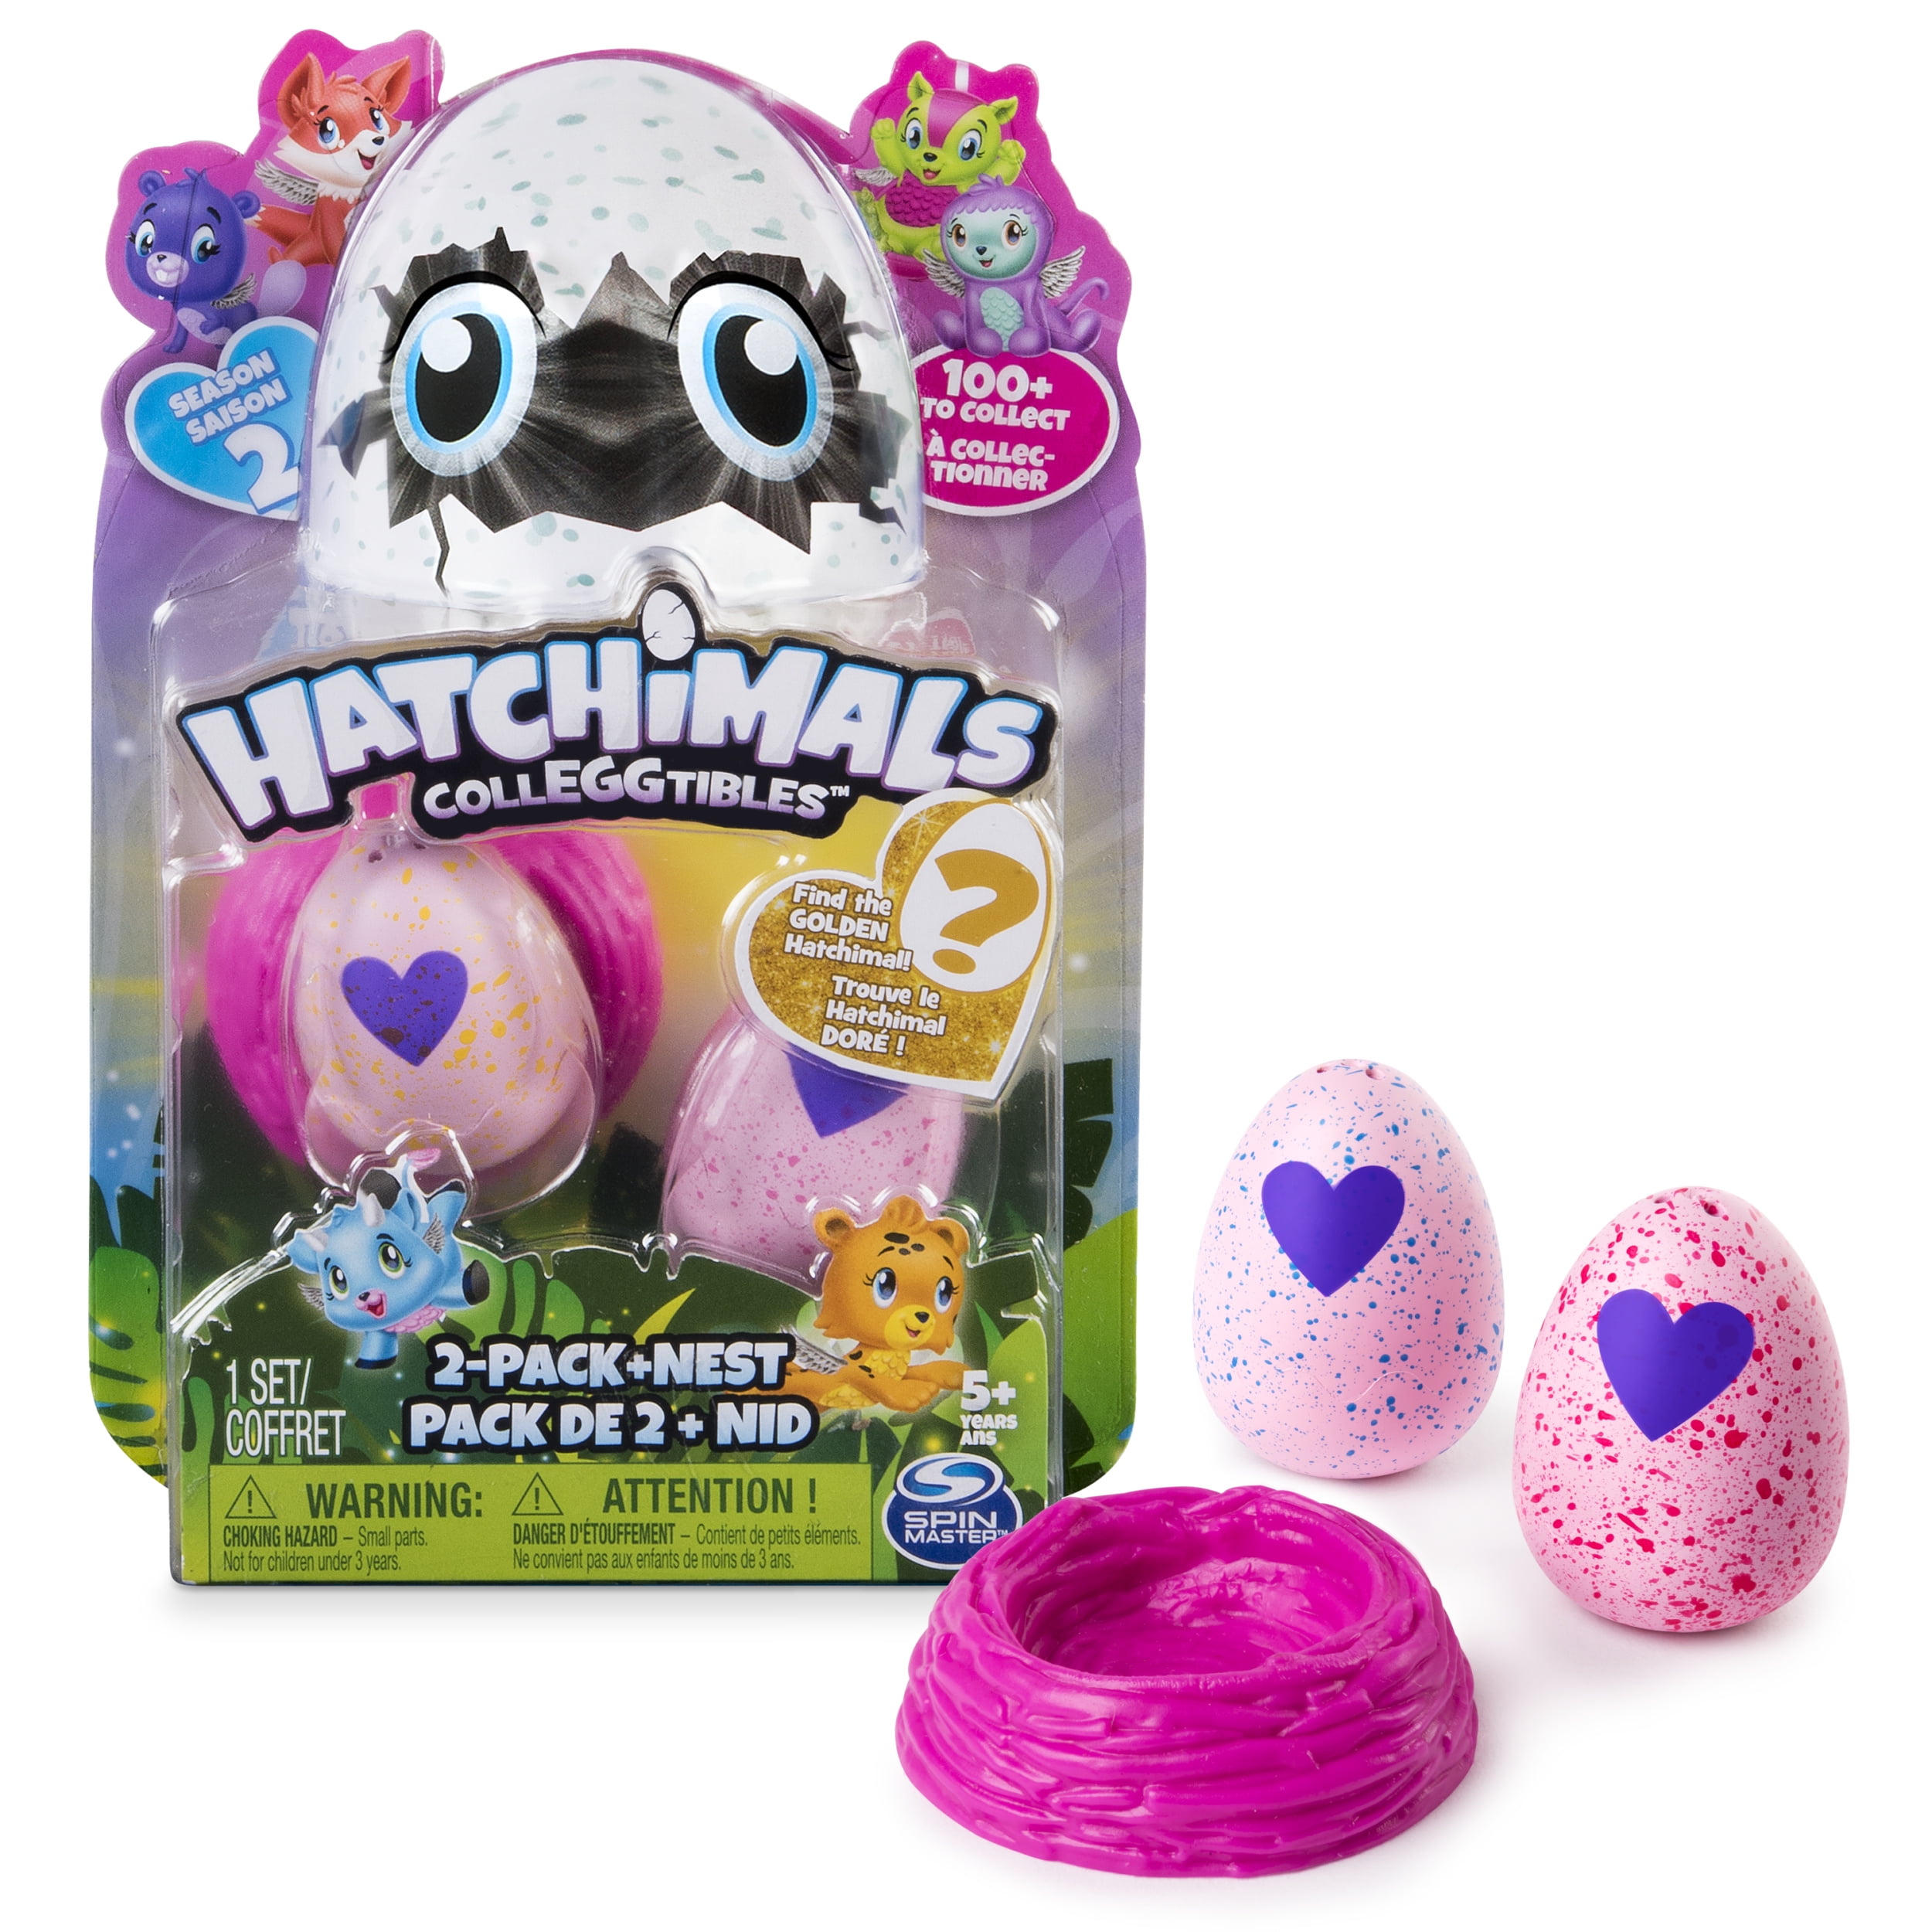 ---2 Pack Collectible egg with Nest Season 2 Details about   Hatchimals Colleggtibles 